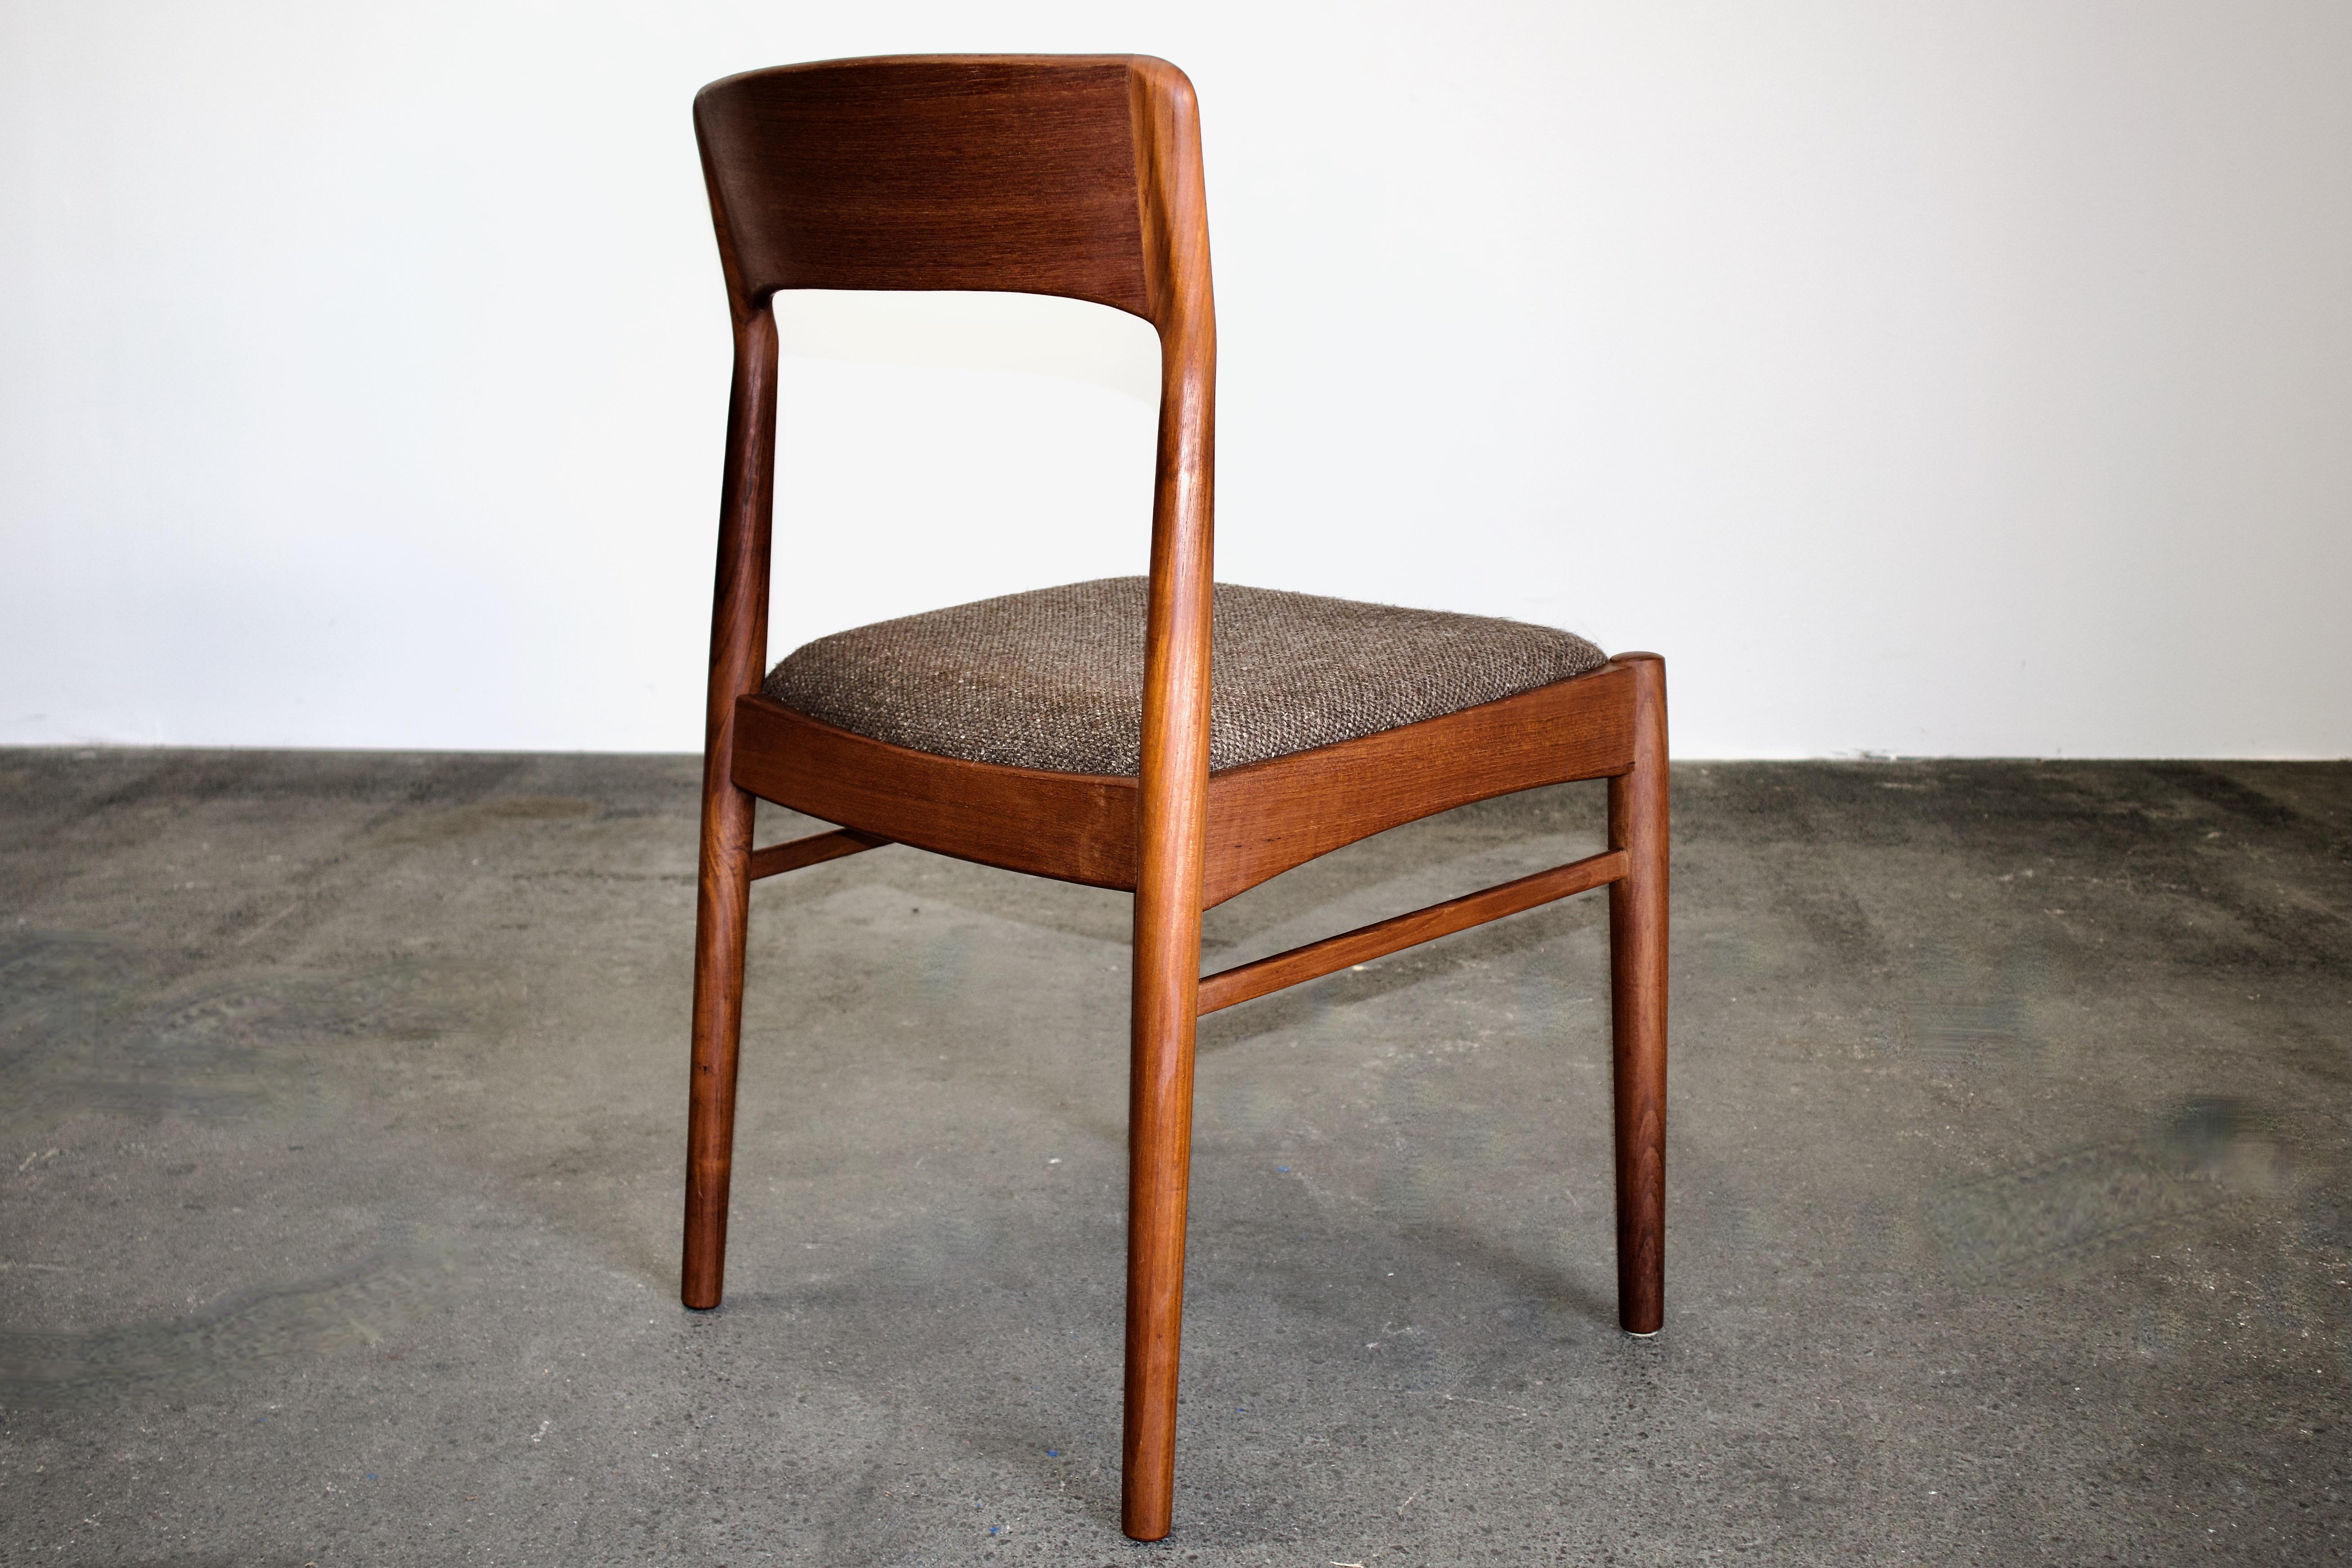 Mid-20th Century Quirky 1960s Danish Teak Chairs By Kai Kristiansen for K.S. Mobler For Sale